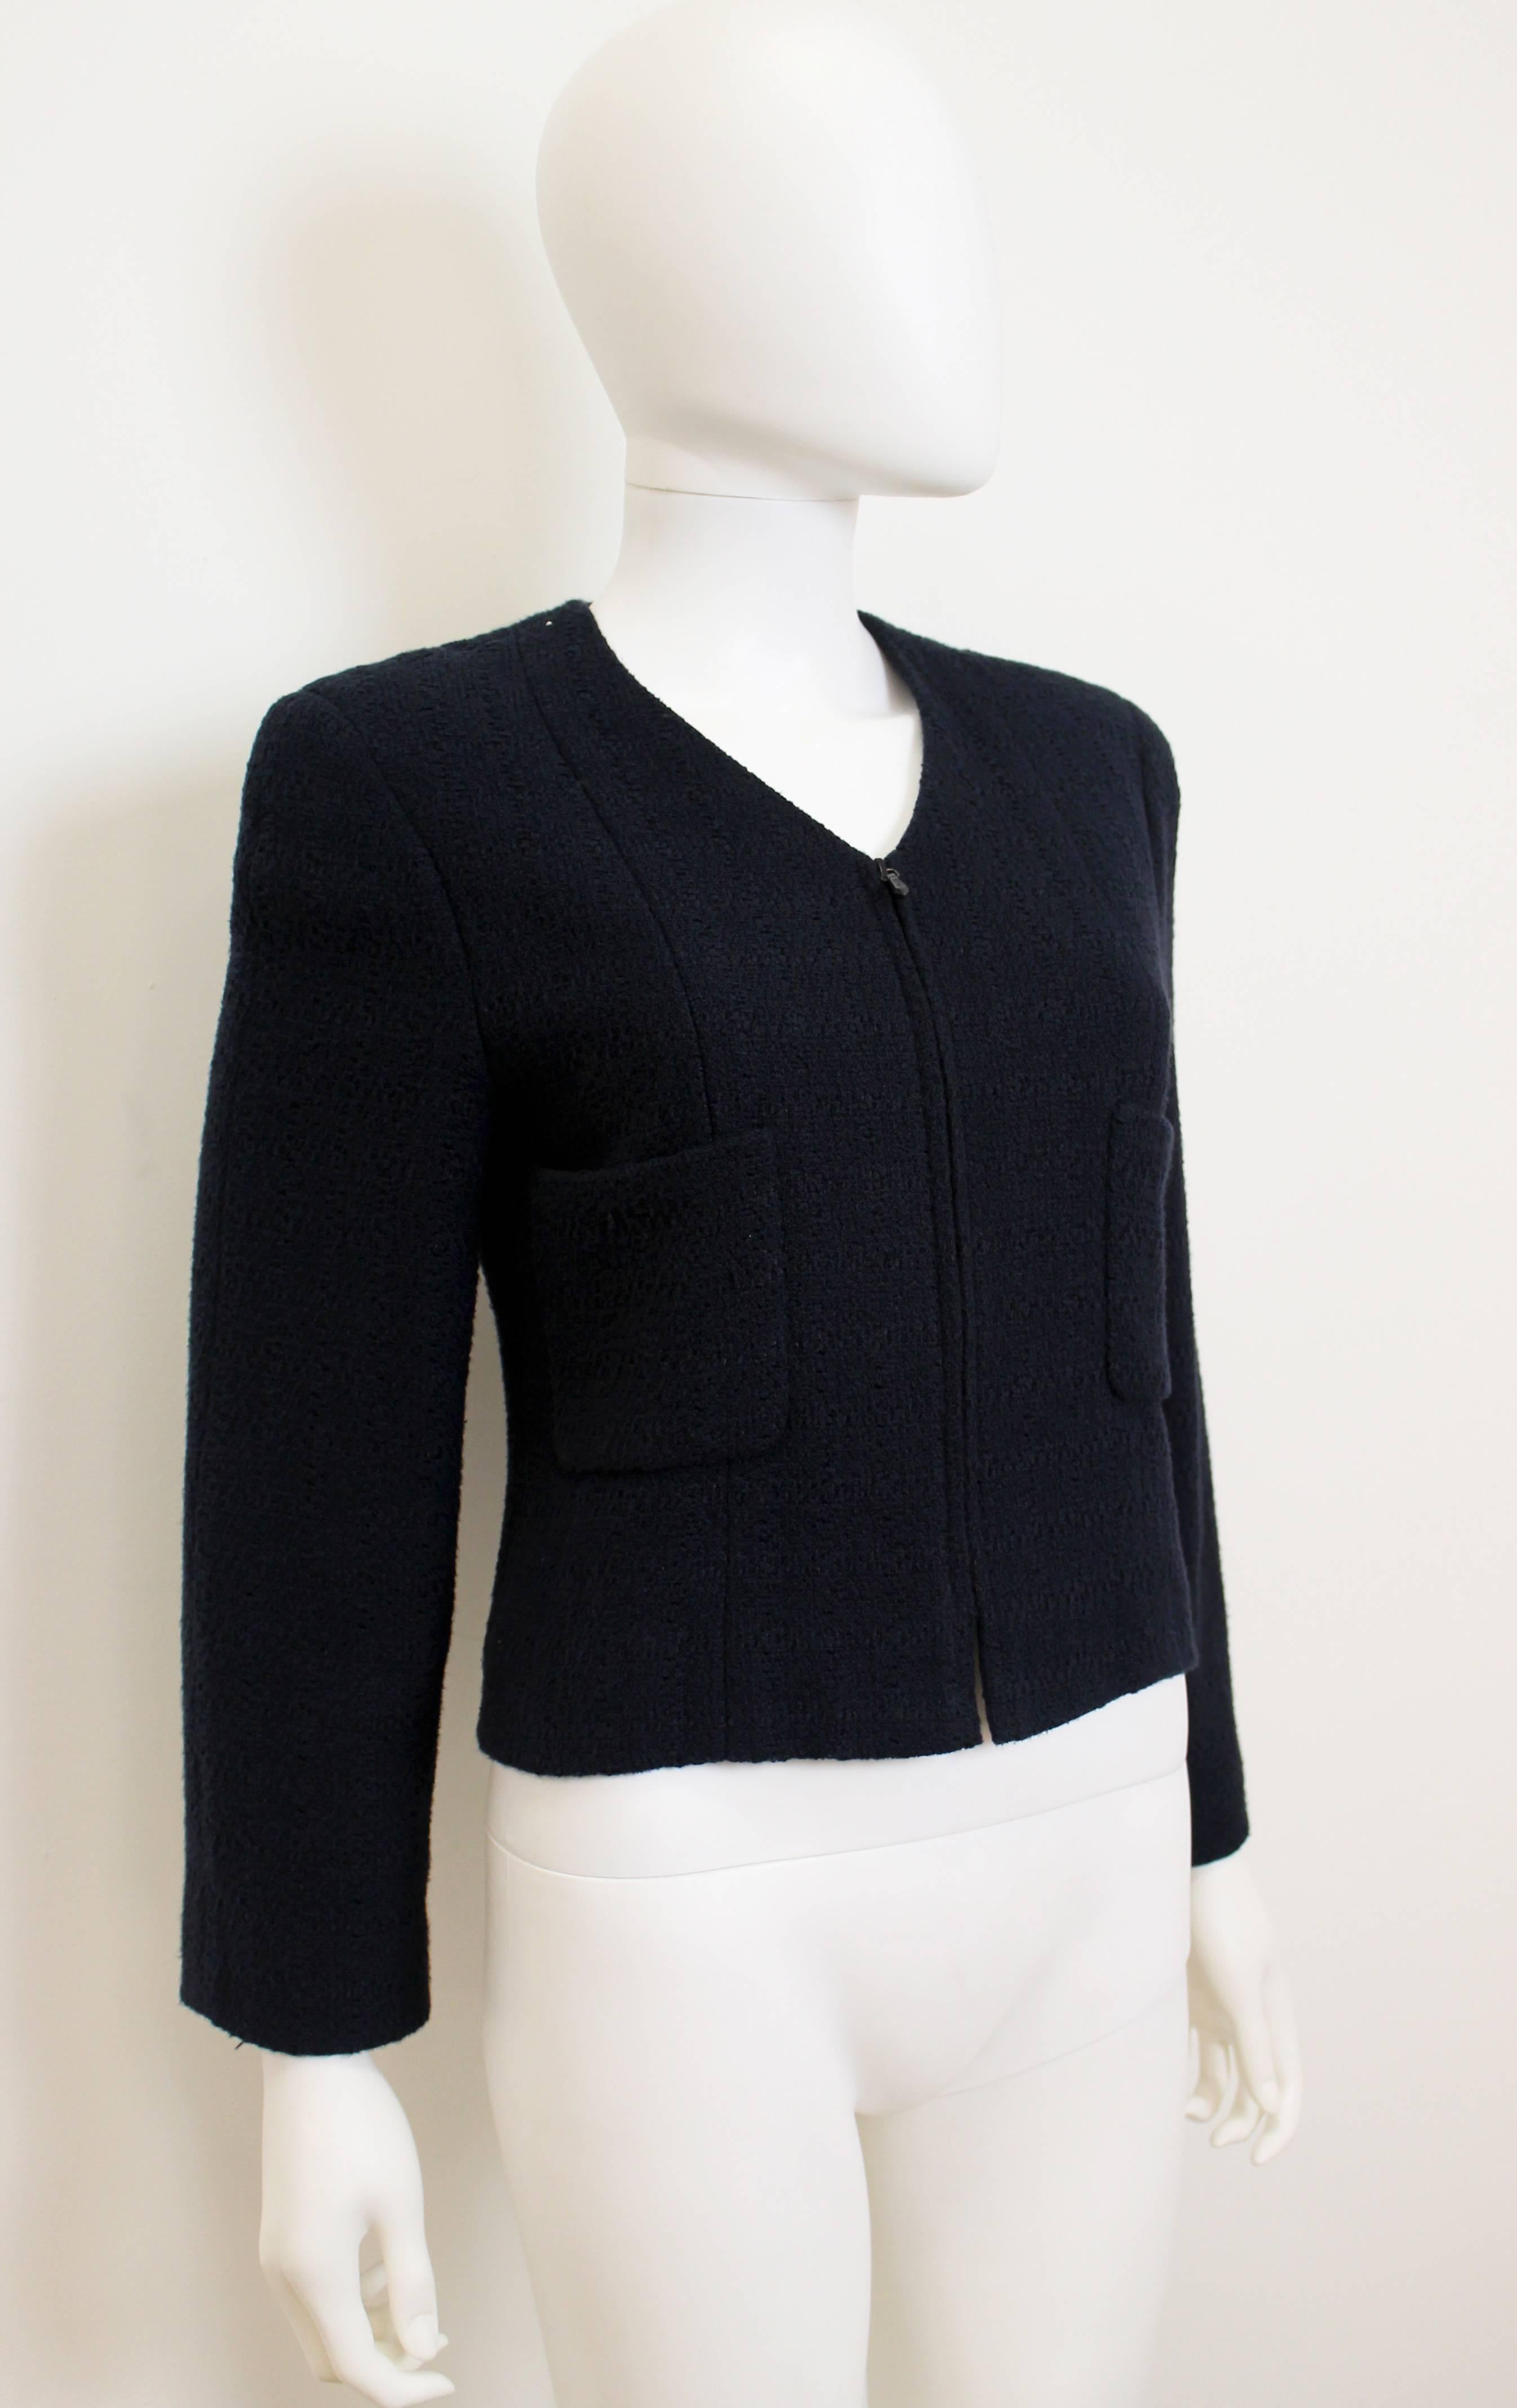 Classic Chanel cotton jacket in navy blue. Features two patch pockets on the waist, as well as a faint check print. Has an invisible zip closure, with Chanel branding on the zipper-tab.